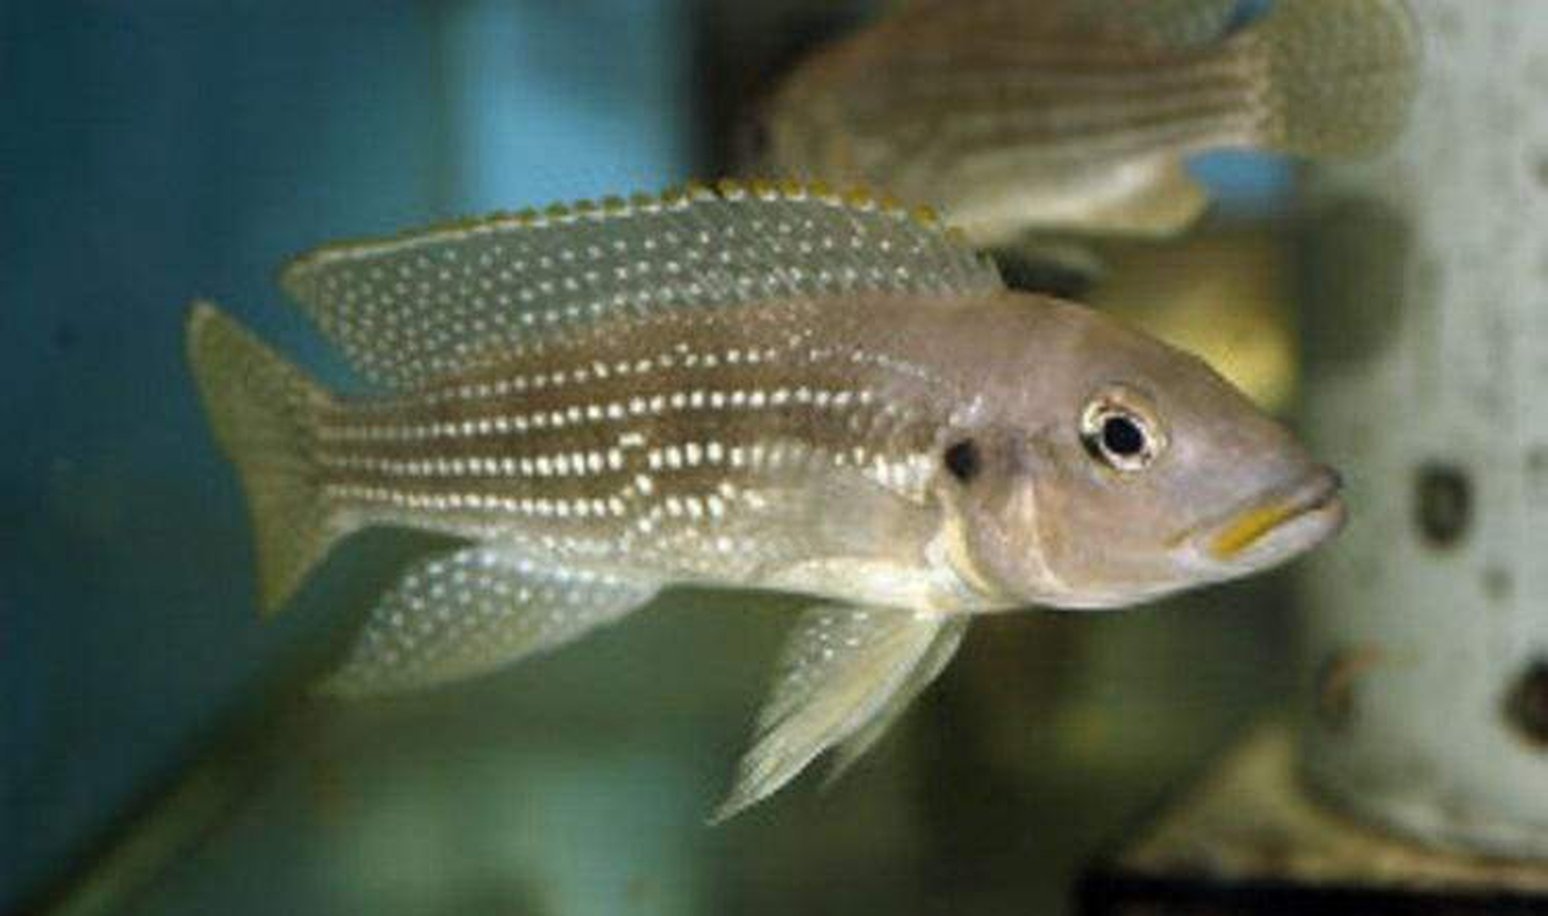 x3 Package - Neolamprologus Tetracanthus Cichlid Sml 1"- 1 1/2" Each-Cichlid - Lake Tanganyikan-www.YourFishStore.com